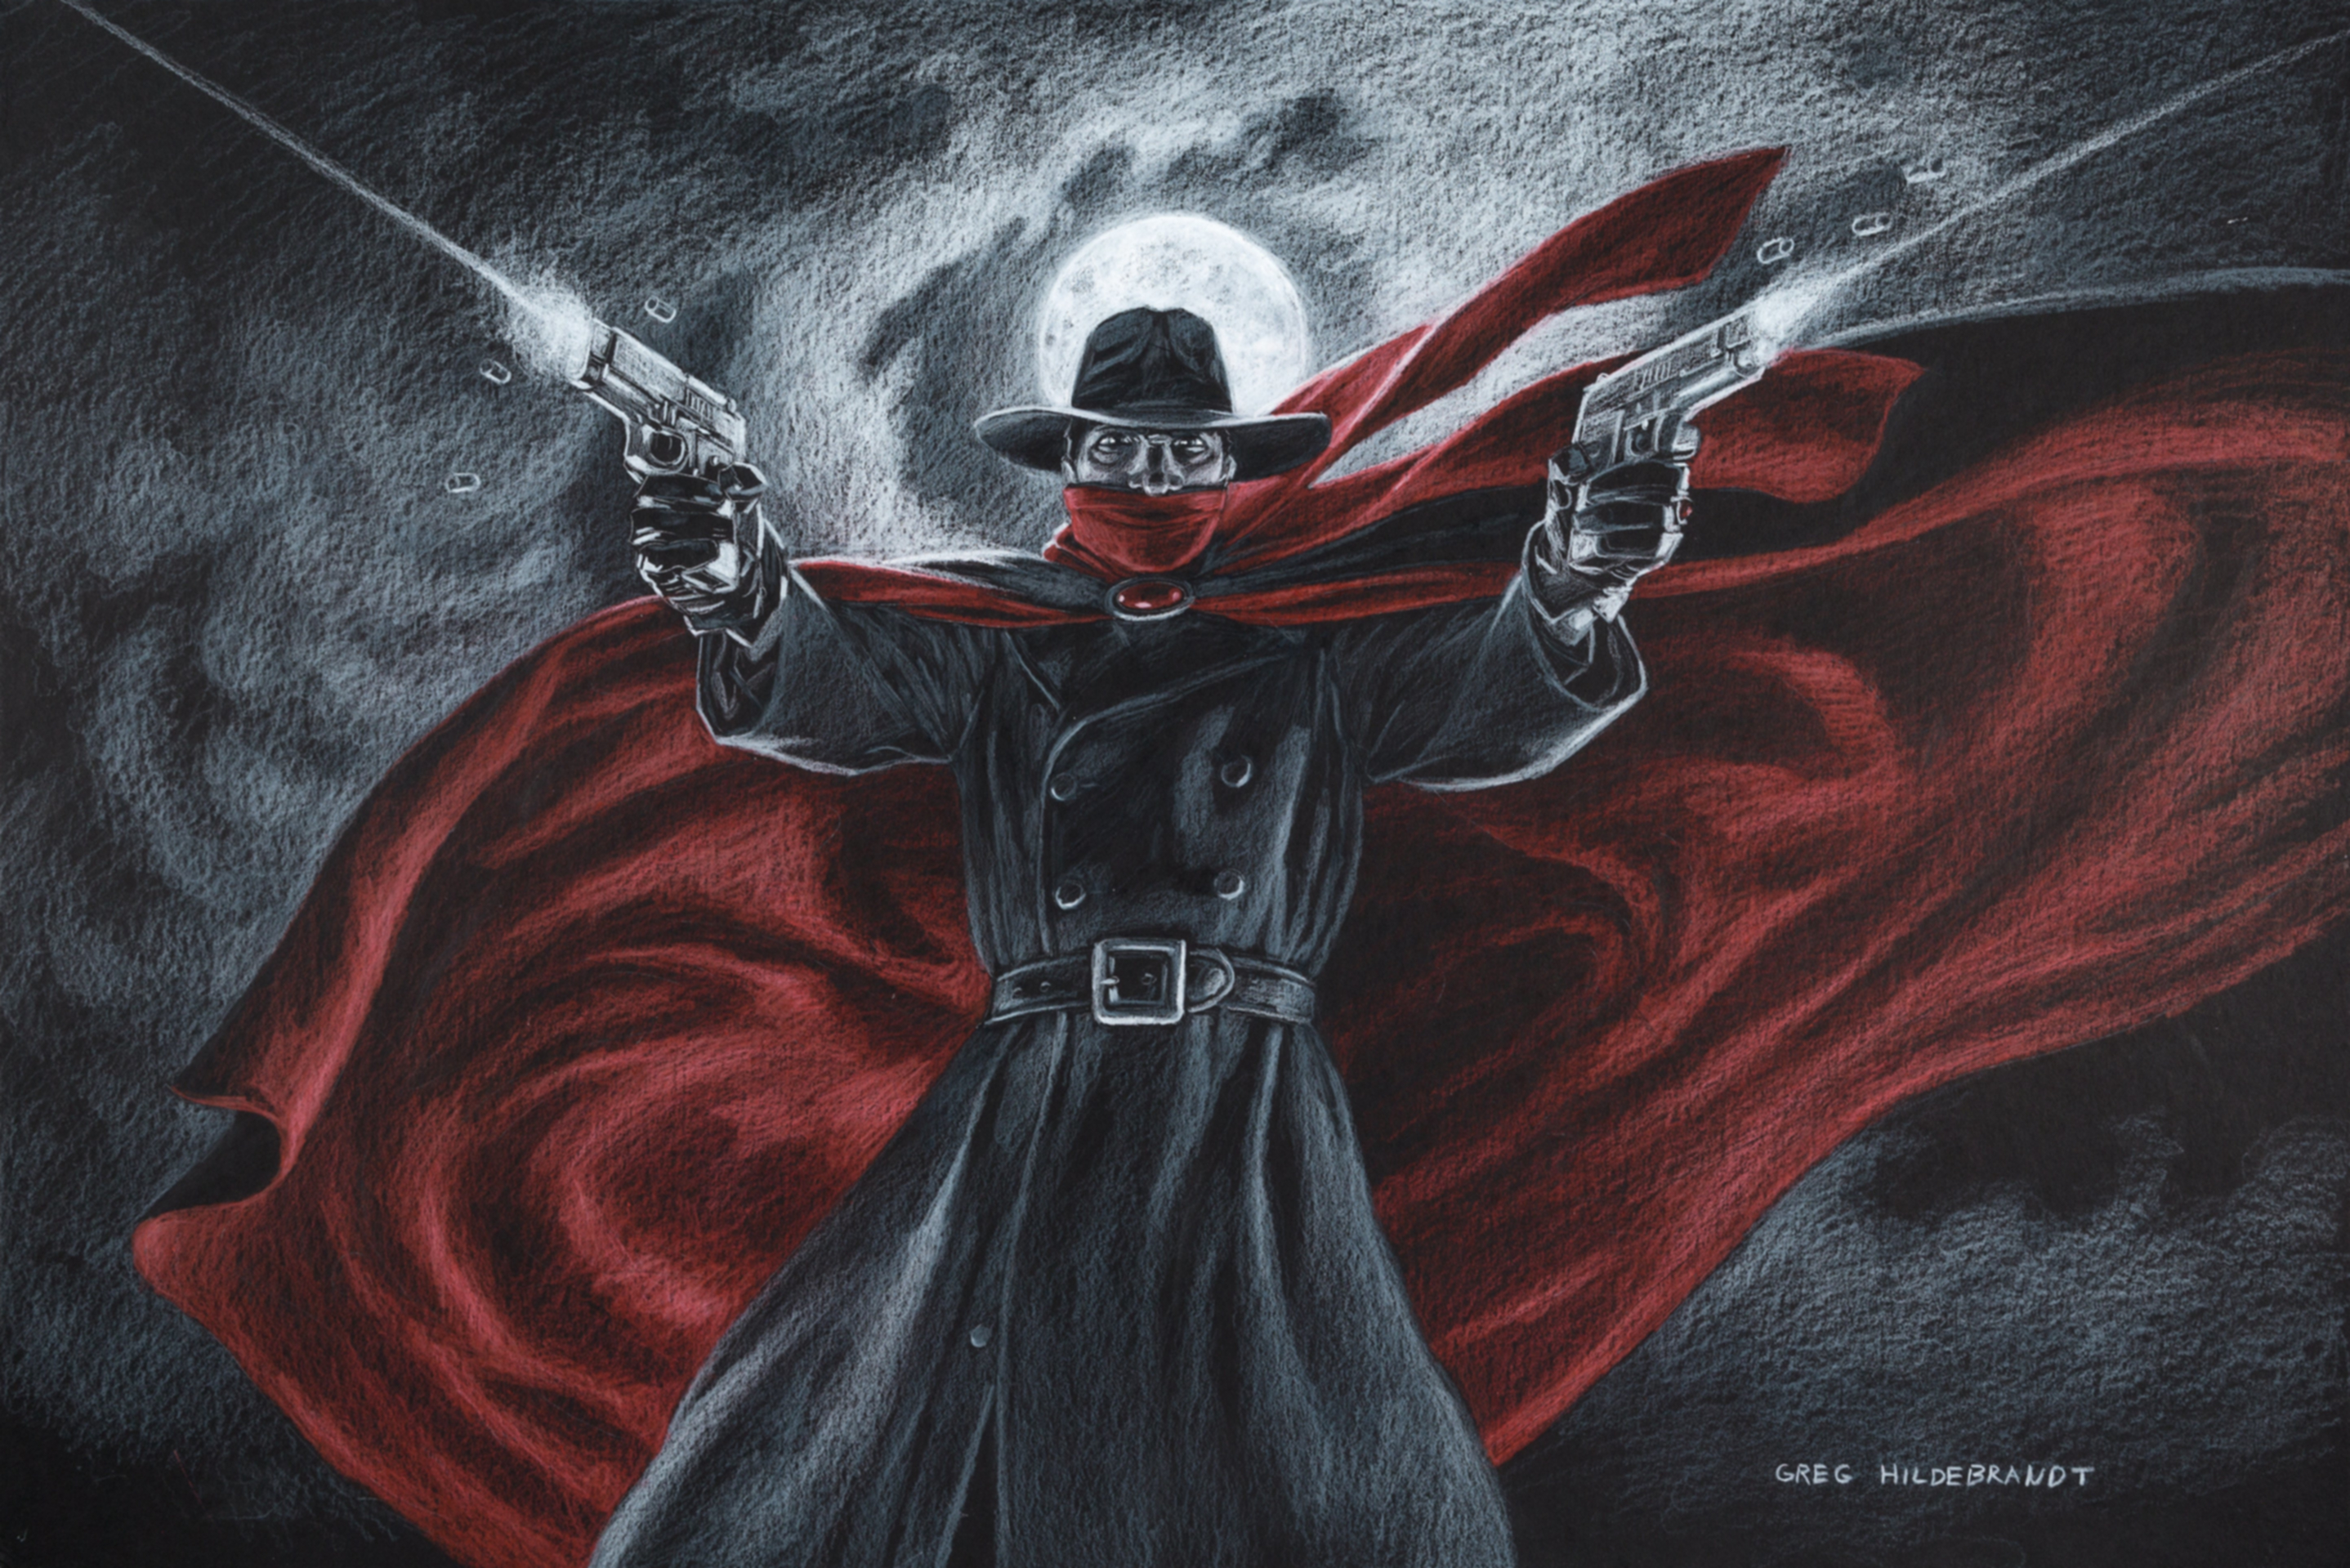 Greg Hildebrandt Chalk Selective Coloring The Shadow Cape Fedora Scarf Trench Coat Pistol Gloves Moo 2876x1919